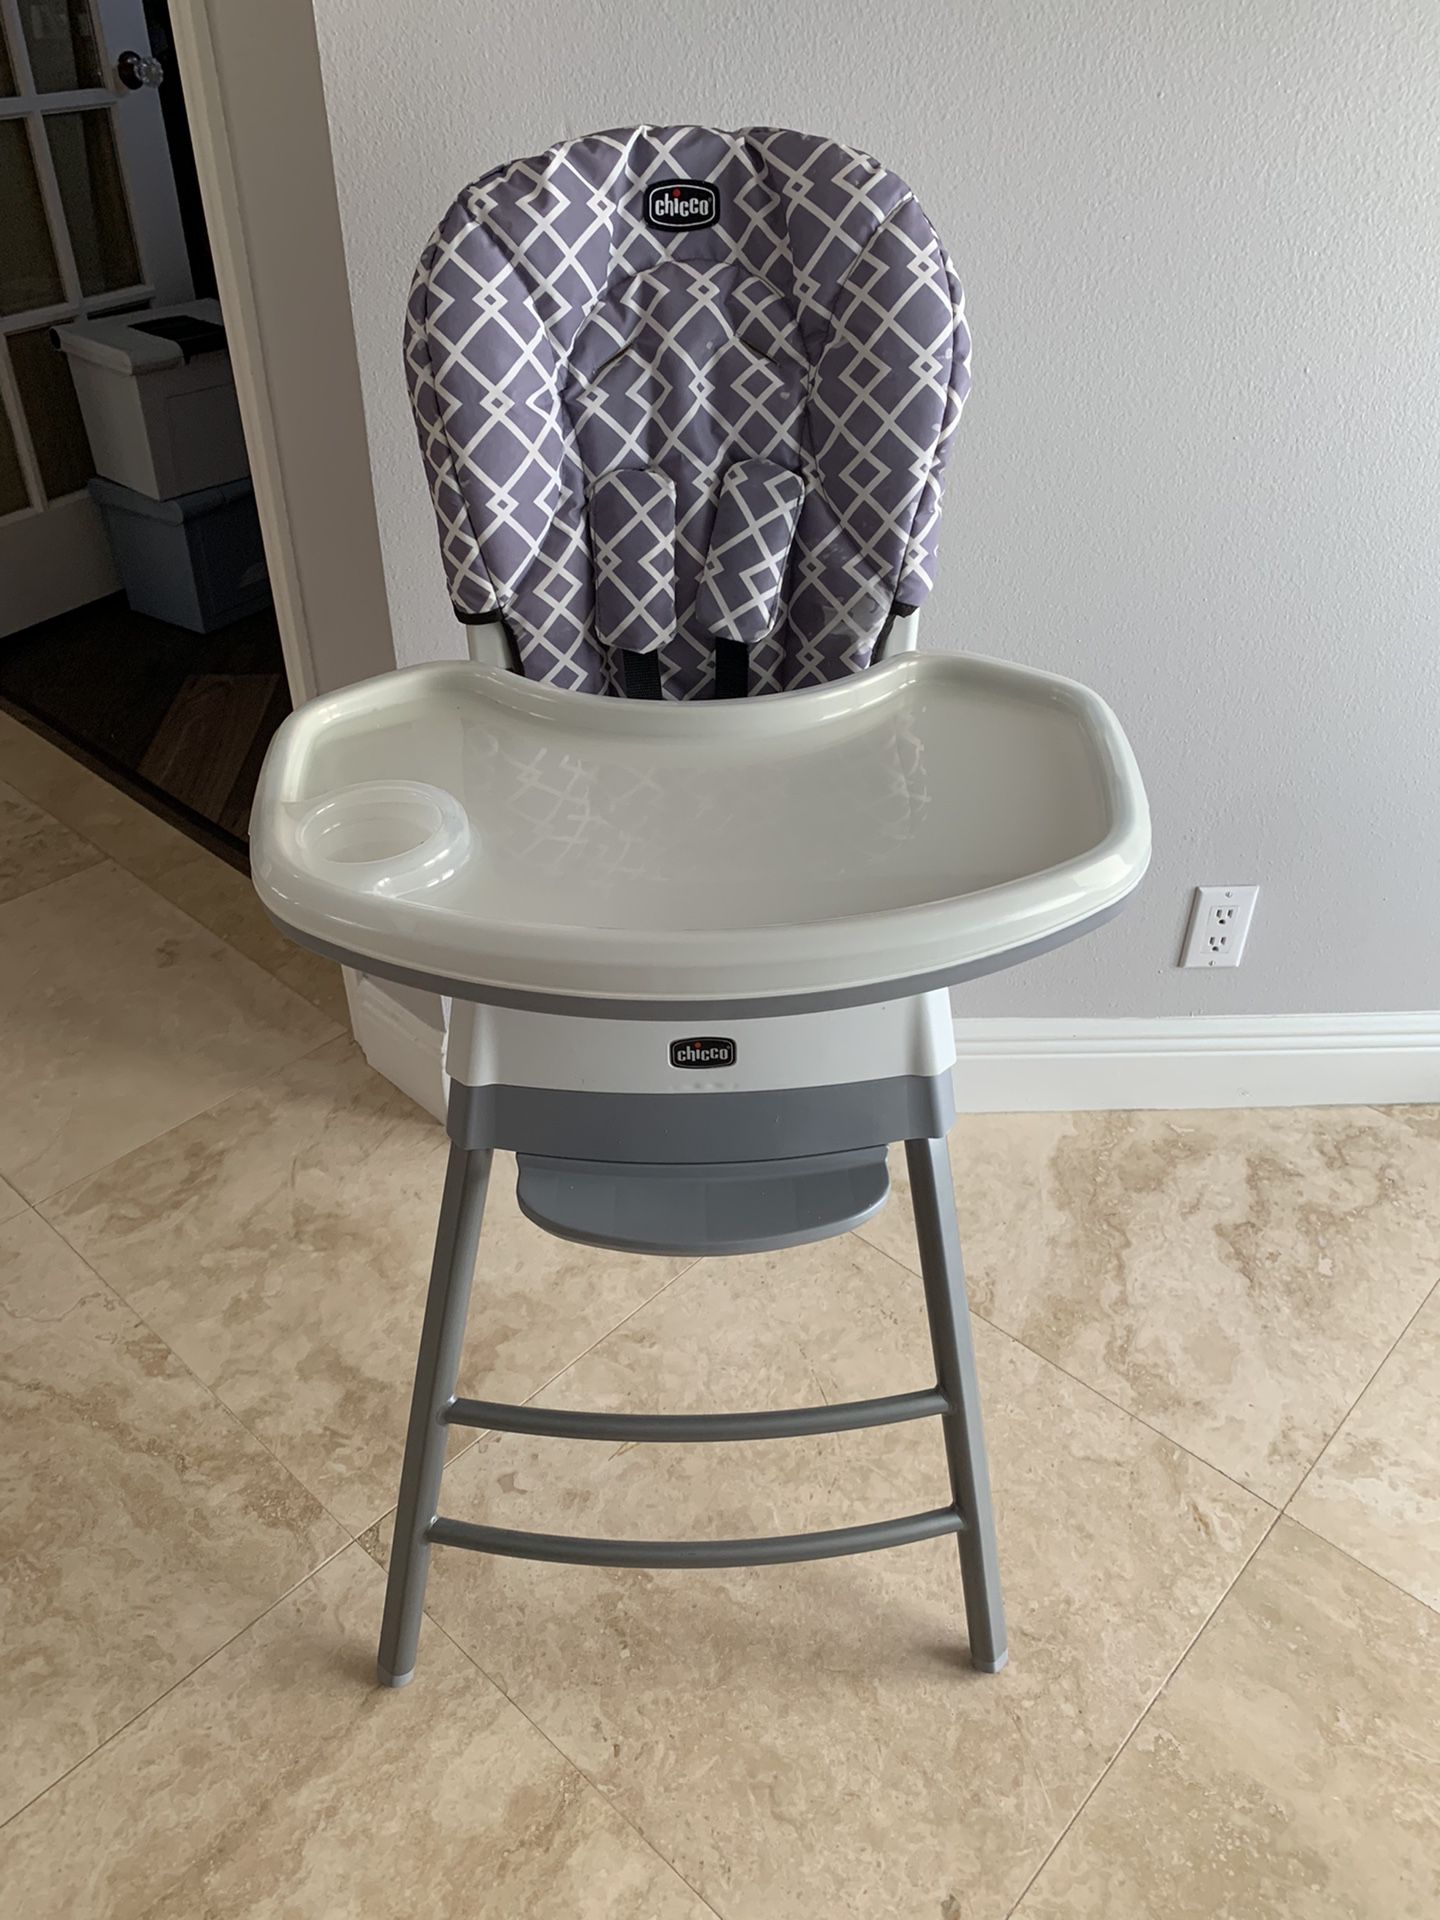 Chicco 1-2-3 Stack Highchair (Clean-Changed Colors After Washing Seat Pad)